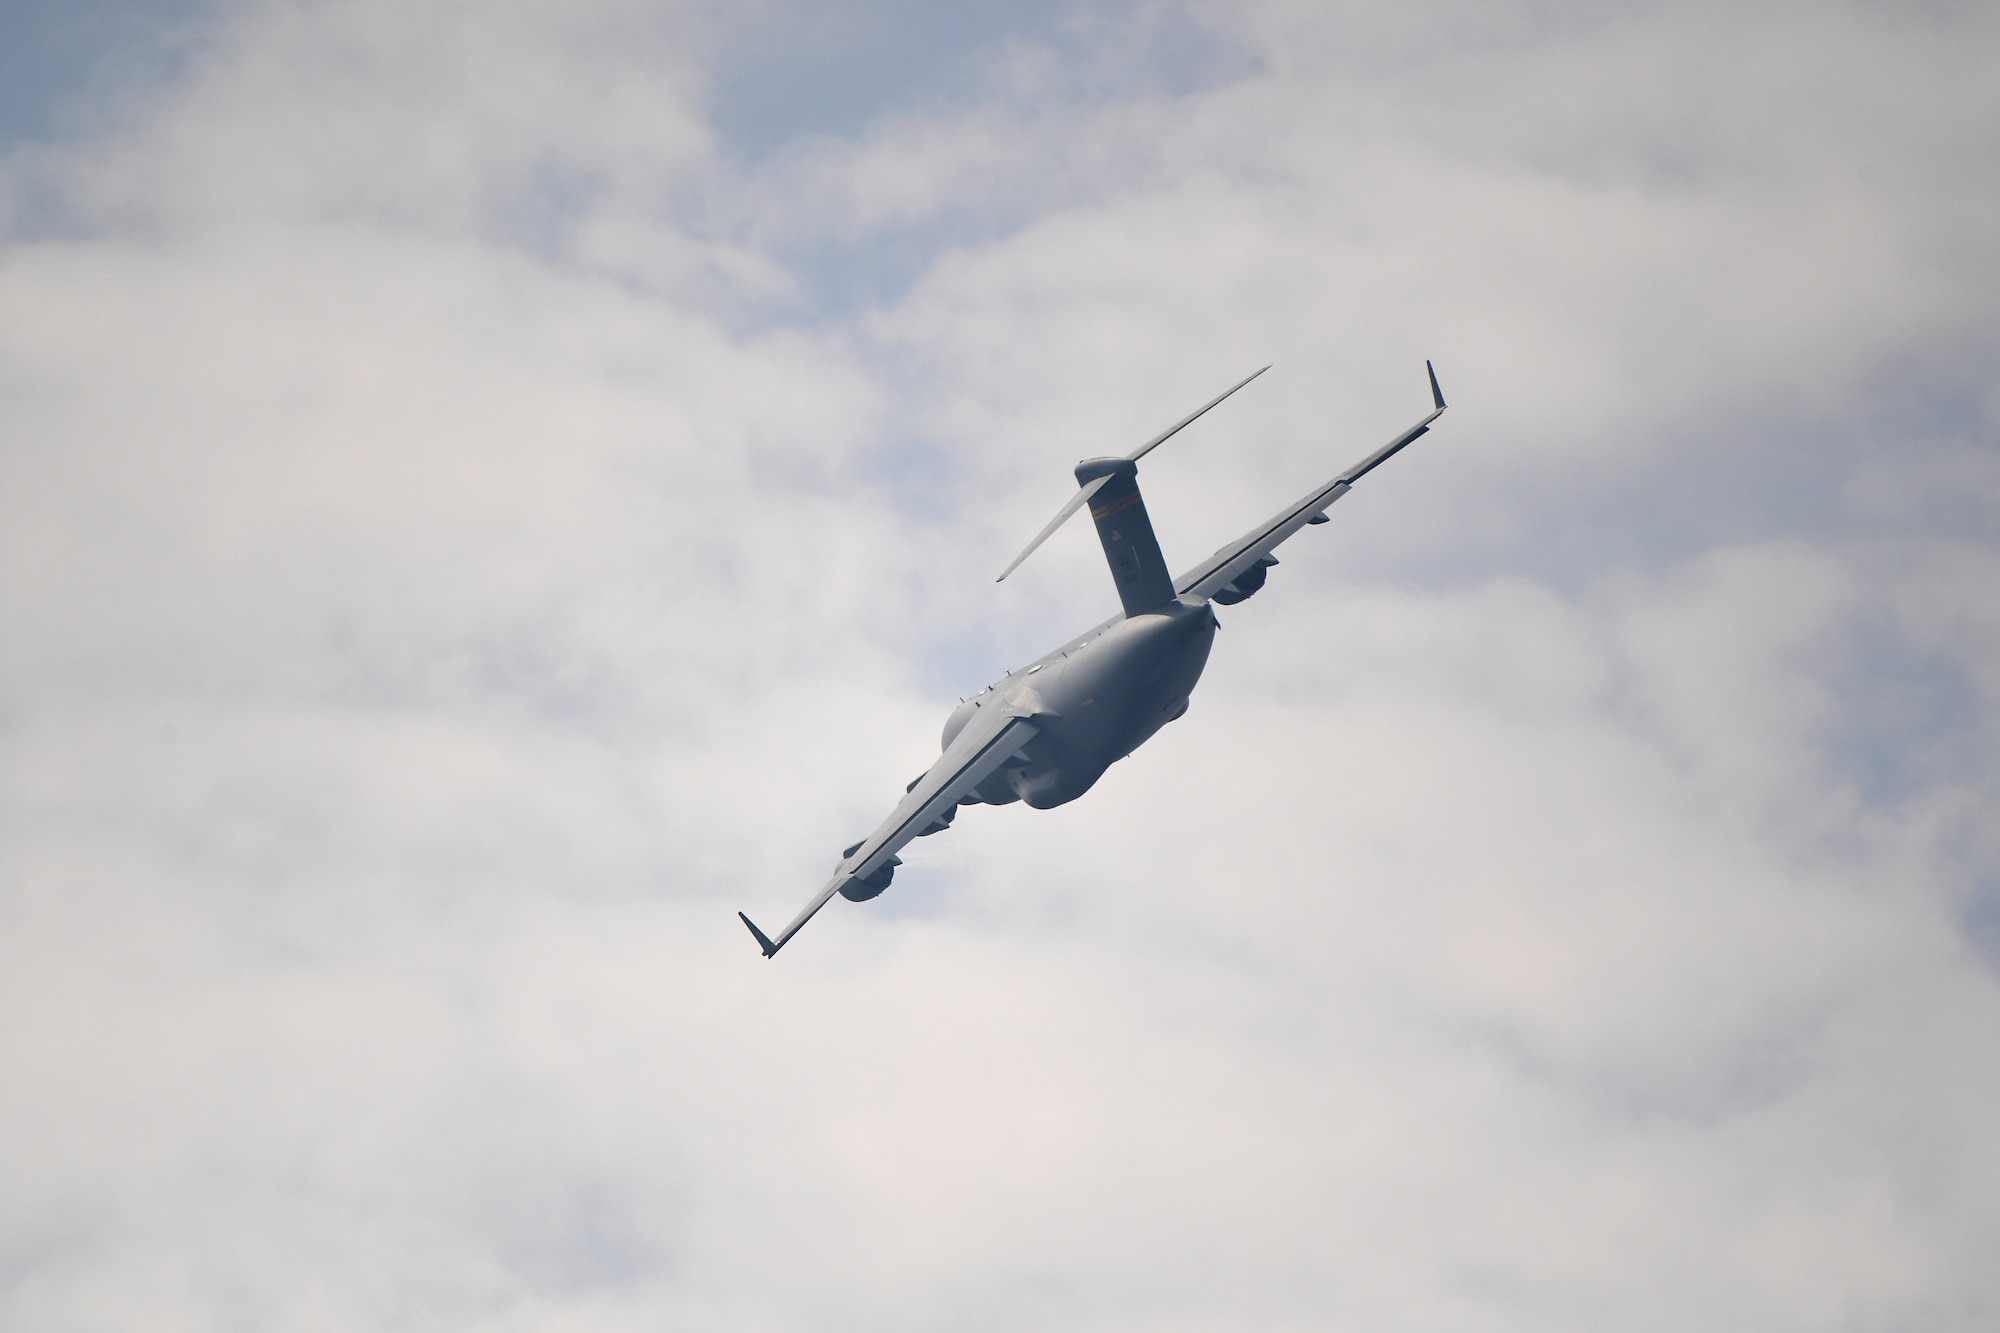 A C-17 Globemaster III assigned to the Pacific Air Forces C-17 Demonstration Team at Joint Base Pearl Harbor-Hickam, Hawaii, performs during the Seoul International Aerospace and Defense Exhibition 2019 at the Seoul Airport, Republic of Korea, October 17, 2019.